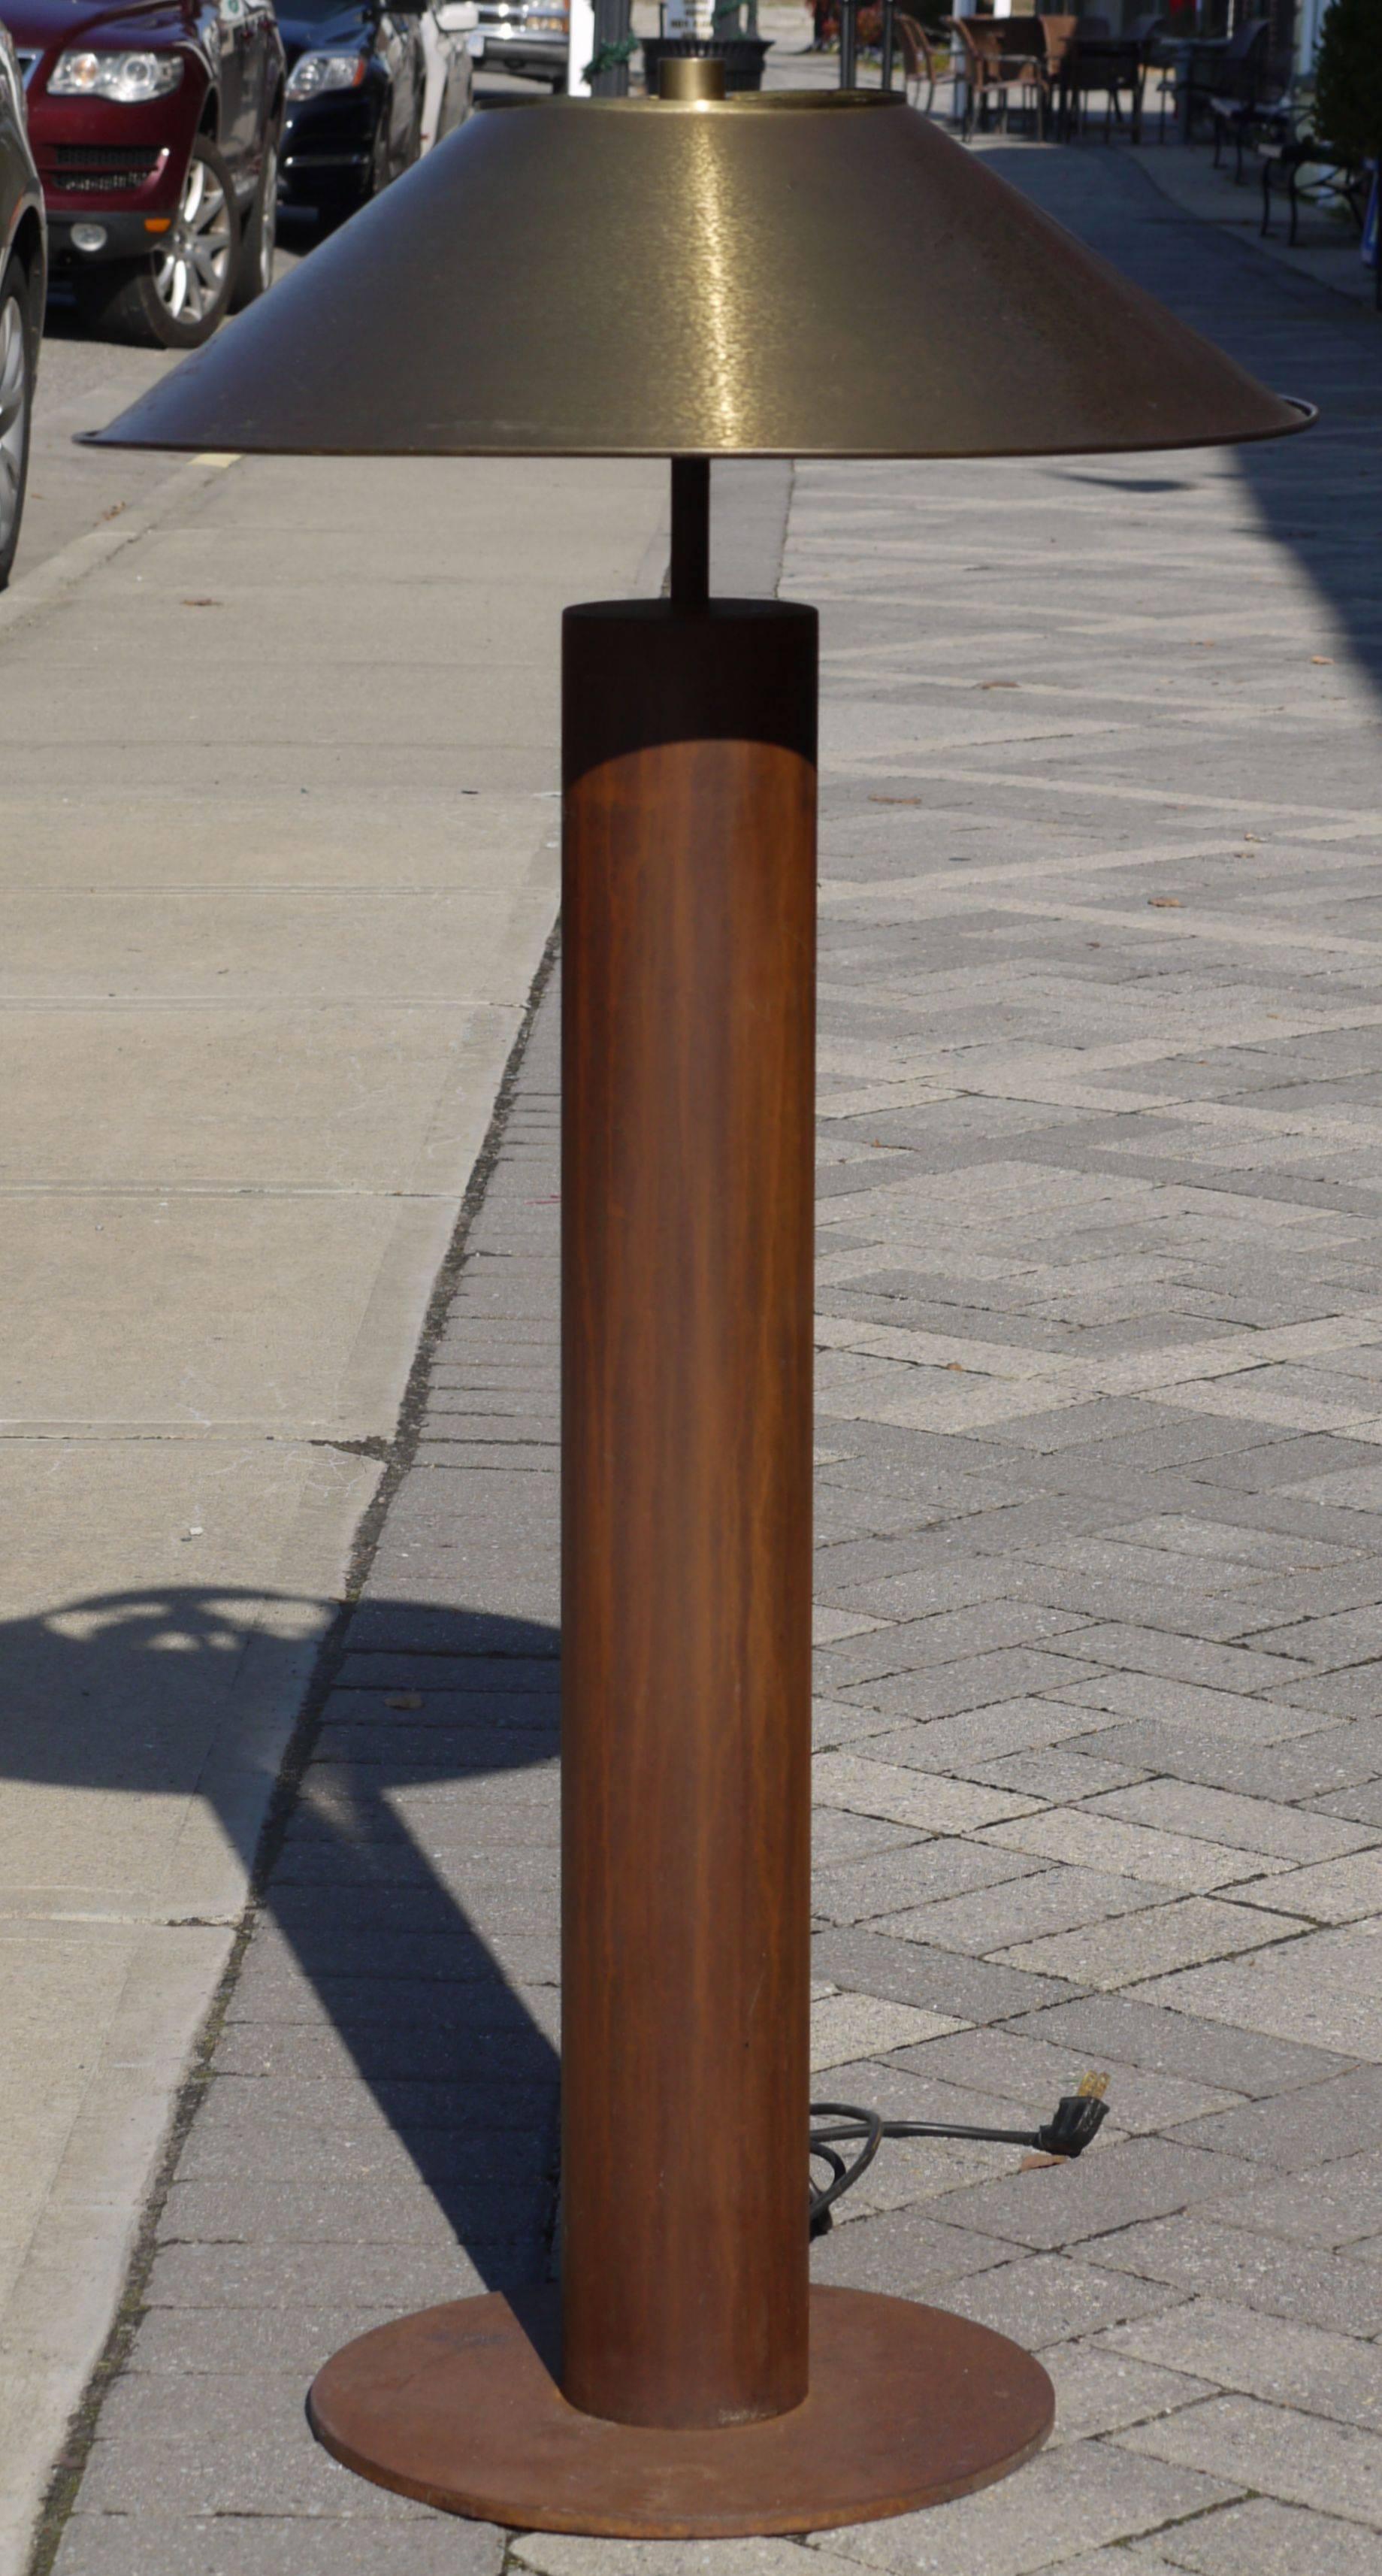 Corten steel floor lamp by Peter Preller for Tecta, Germany. Incredibly simple clean modernist design, almost Zen like in its simplicity and the construction is seamless. The low slung design of the floor lamp mixes well with modern furniture.